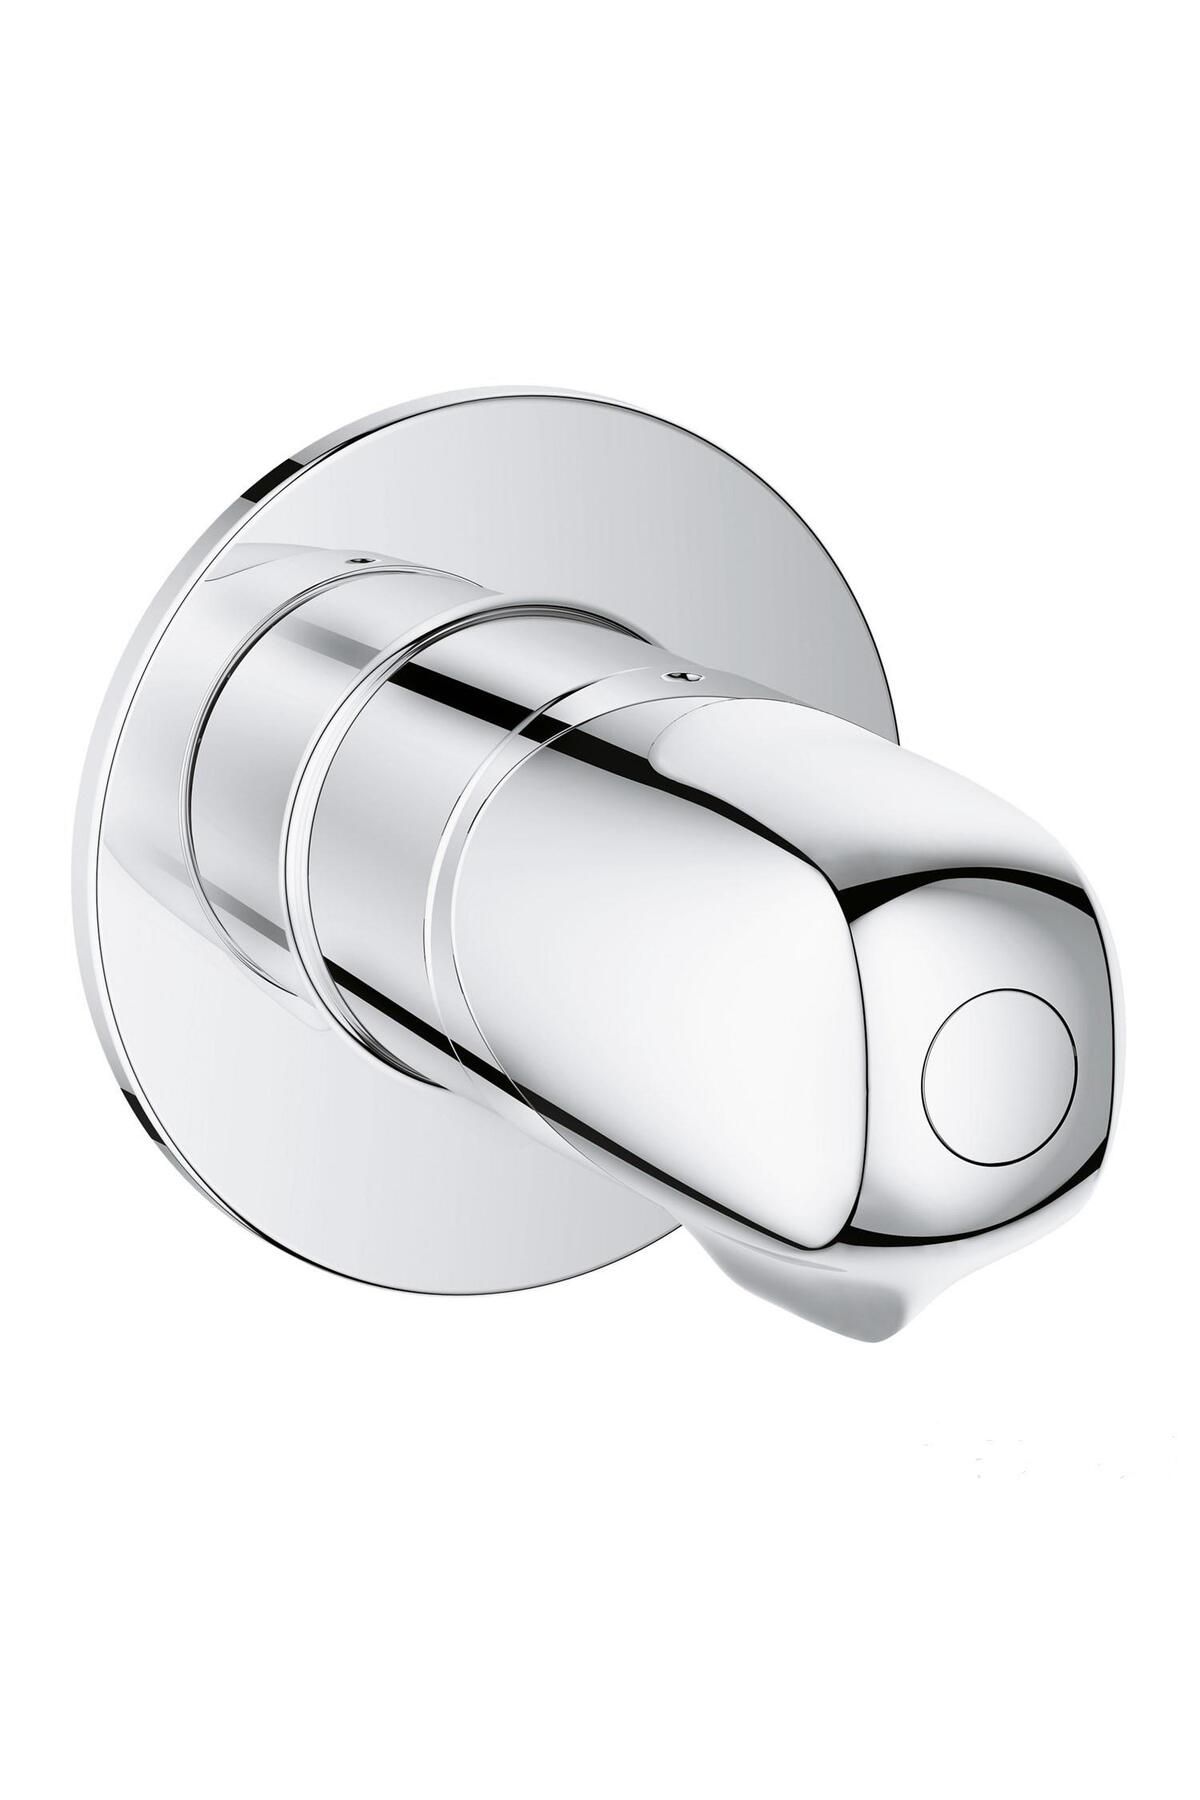 Grohe Grohtherm 1000 New Ankastre Stop Valf - 19981000